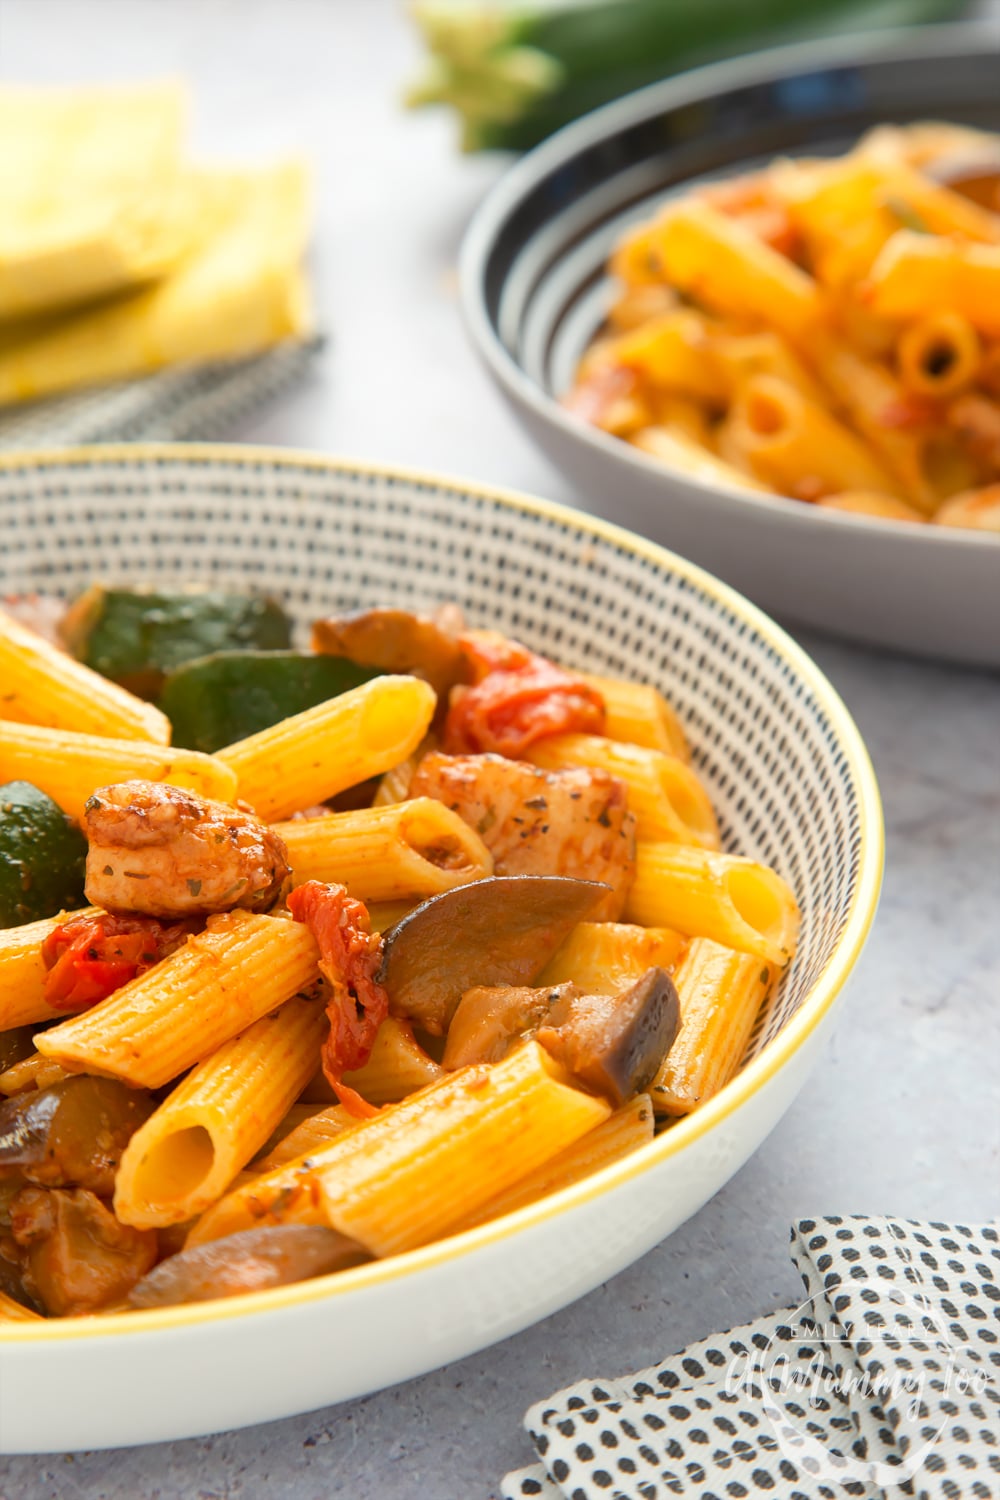 This zingy pasta dish was inspired by a meal in Cyprus. Made with halloumi, courgette, aubergine and fresh cherry tomatoes